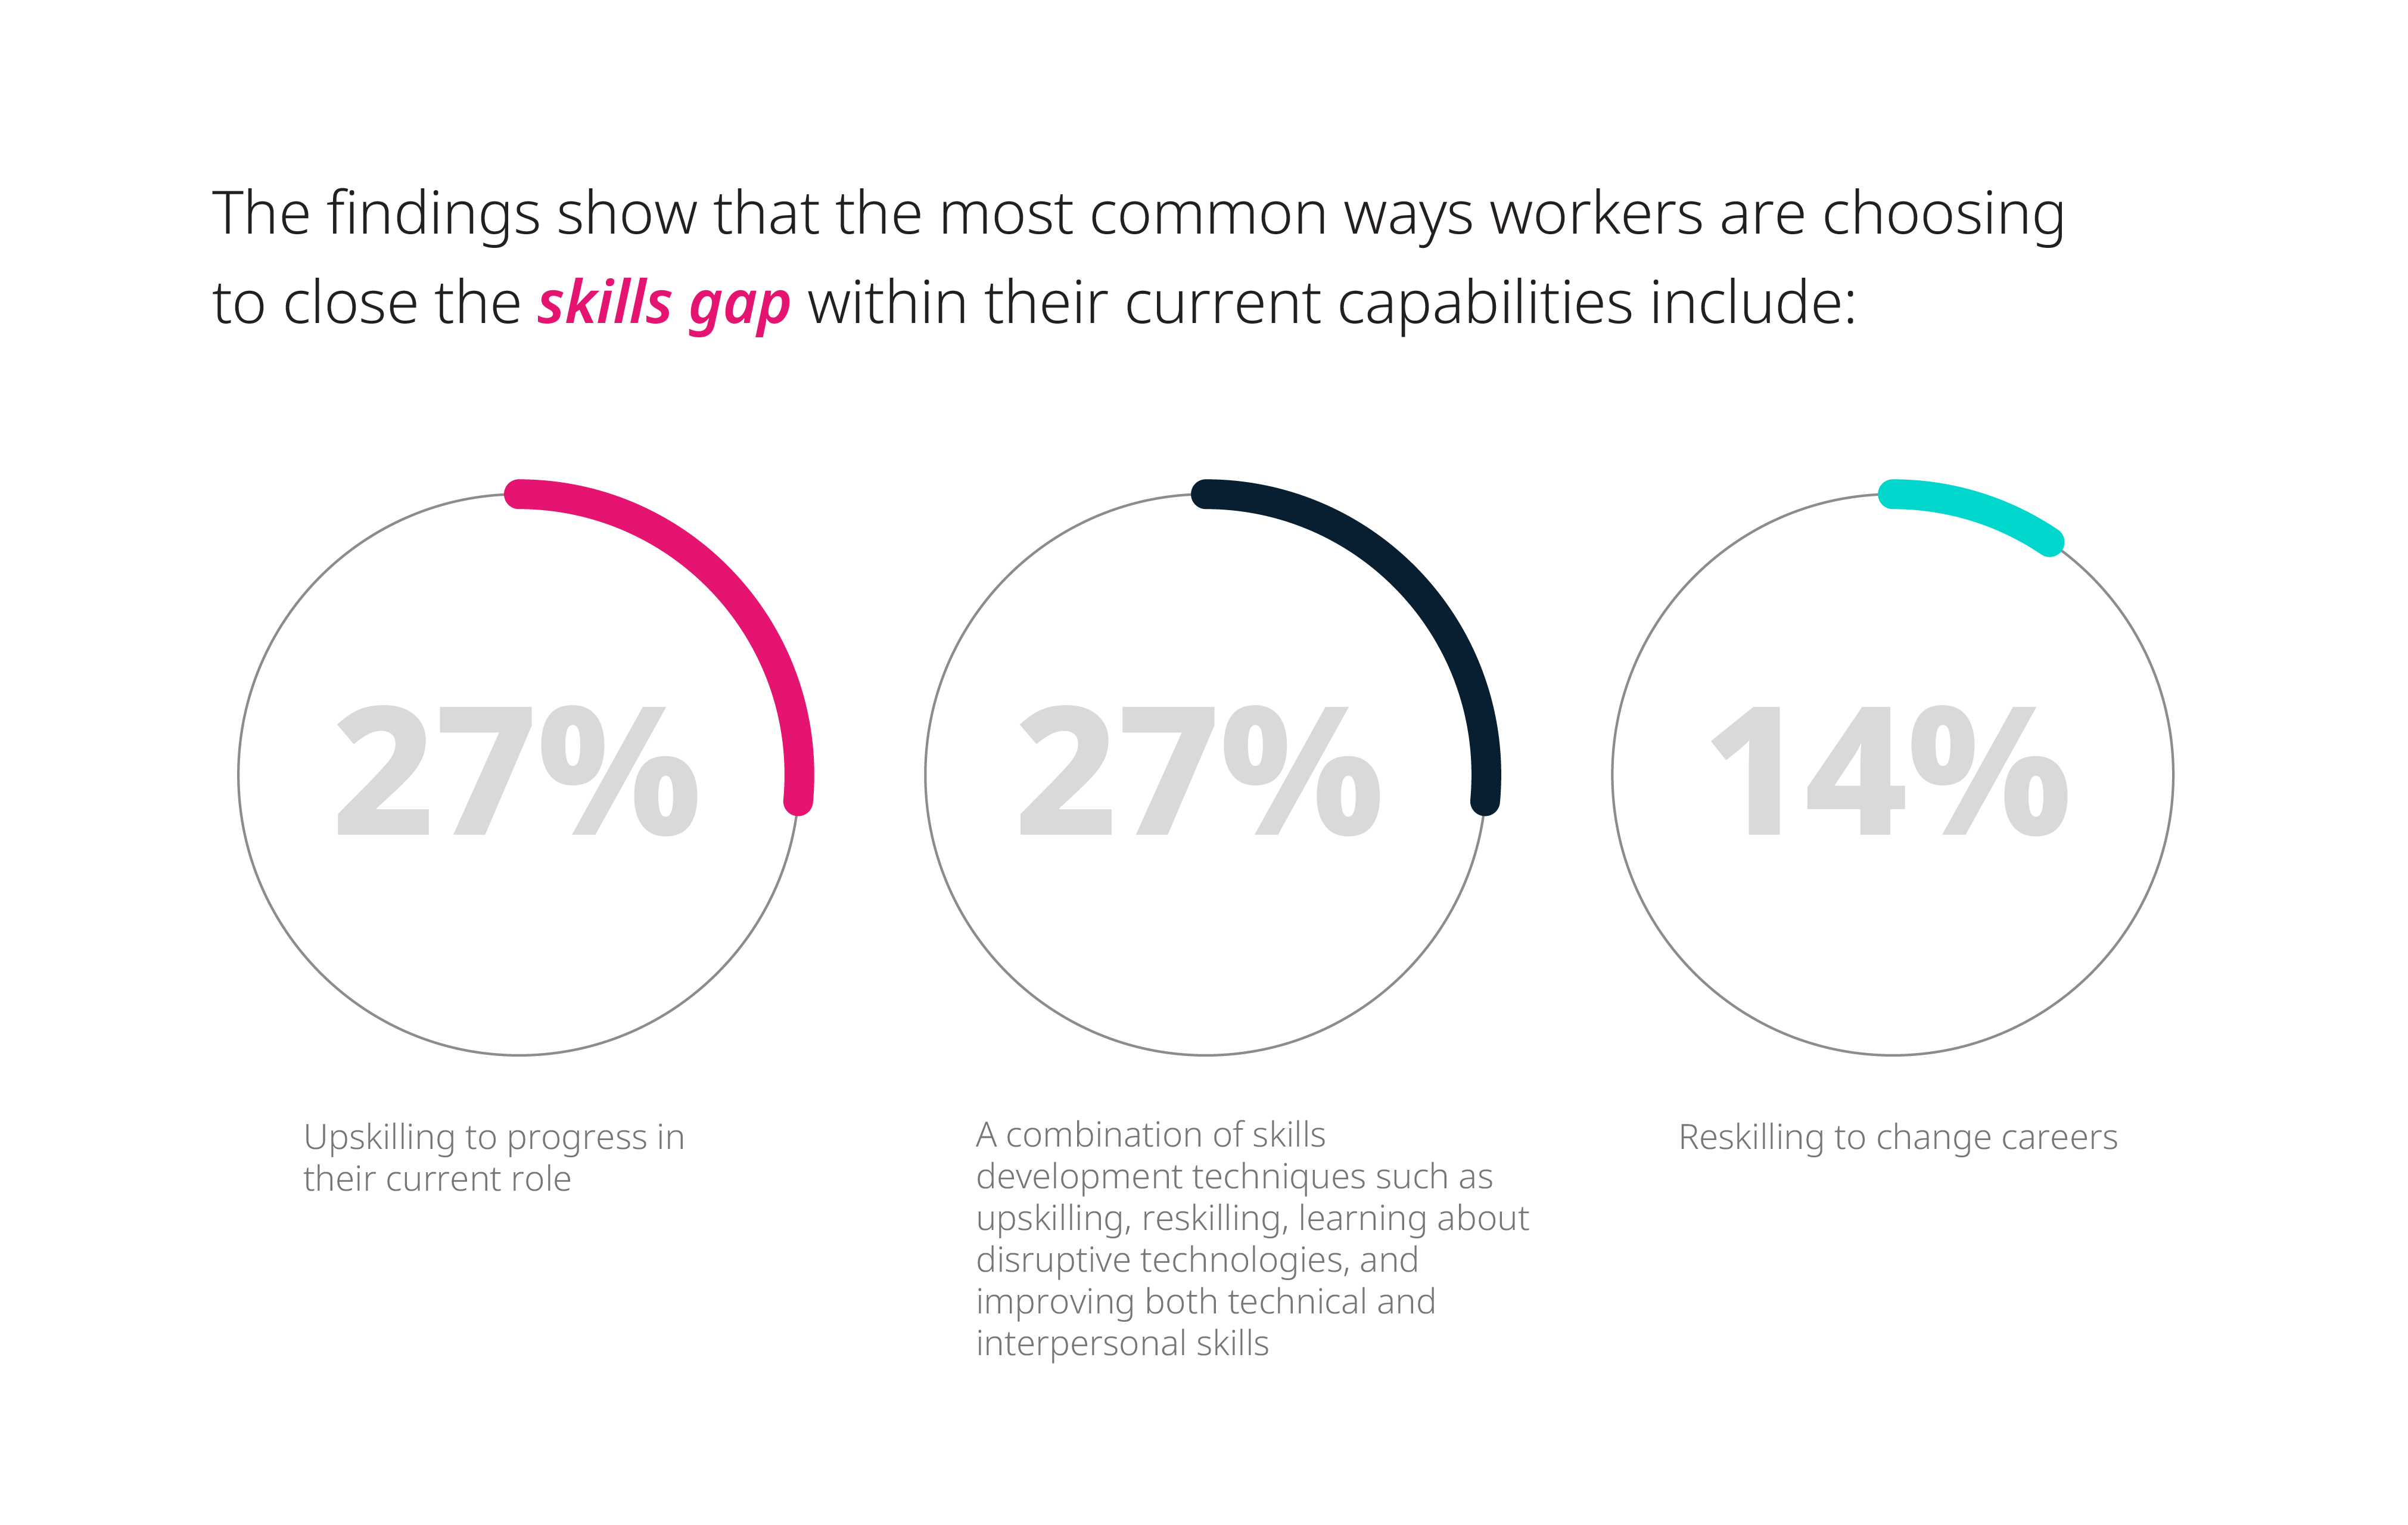 How workers are choosing to close the skills gap within their current capabilities